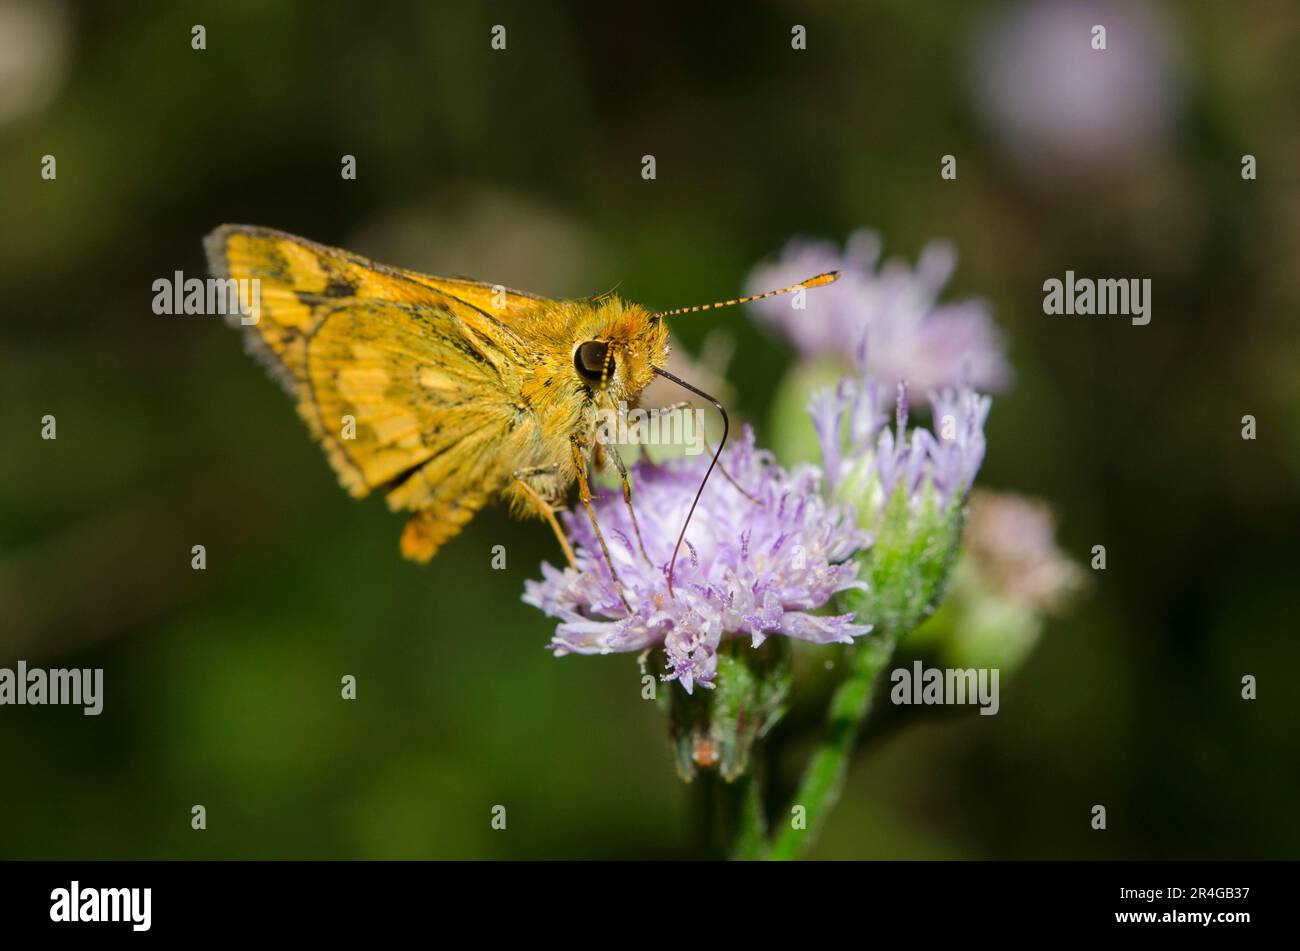 Large Dart, Potanthus serina, with proboscis in Goatweed flower, Ageratum conyzoides, Klungkung, Bali, Indonesia Stock Photo